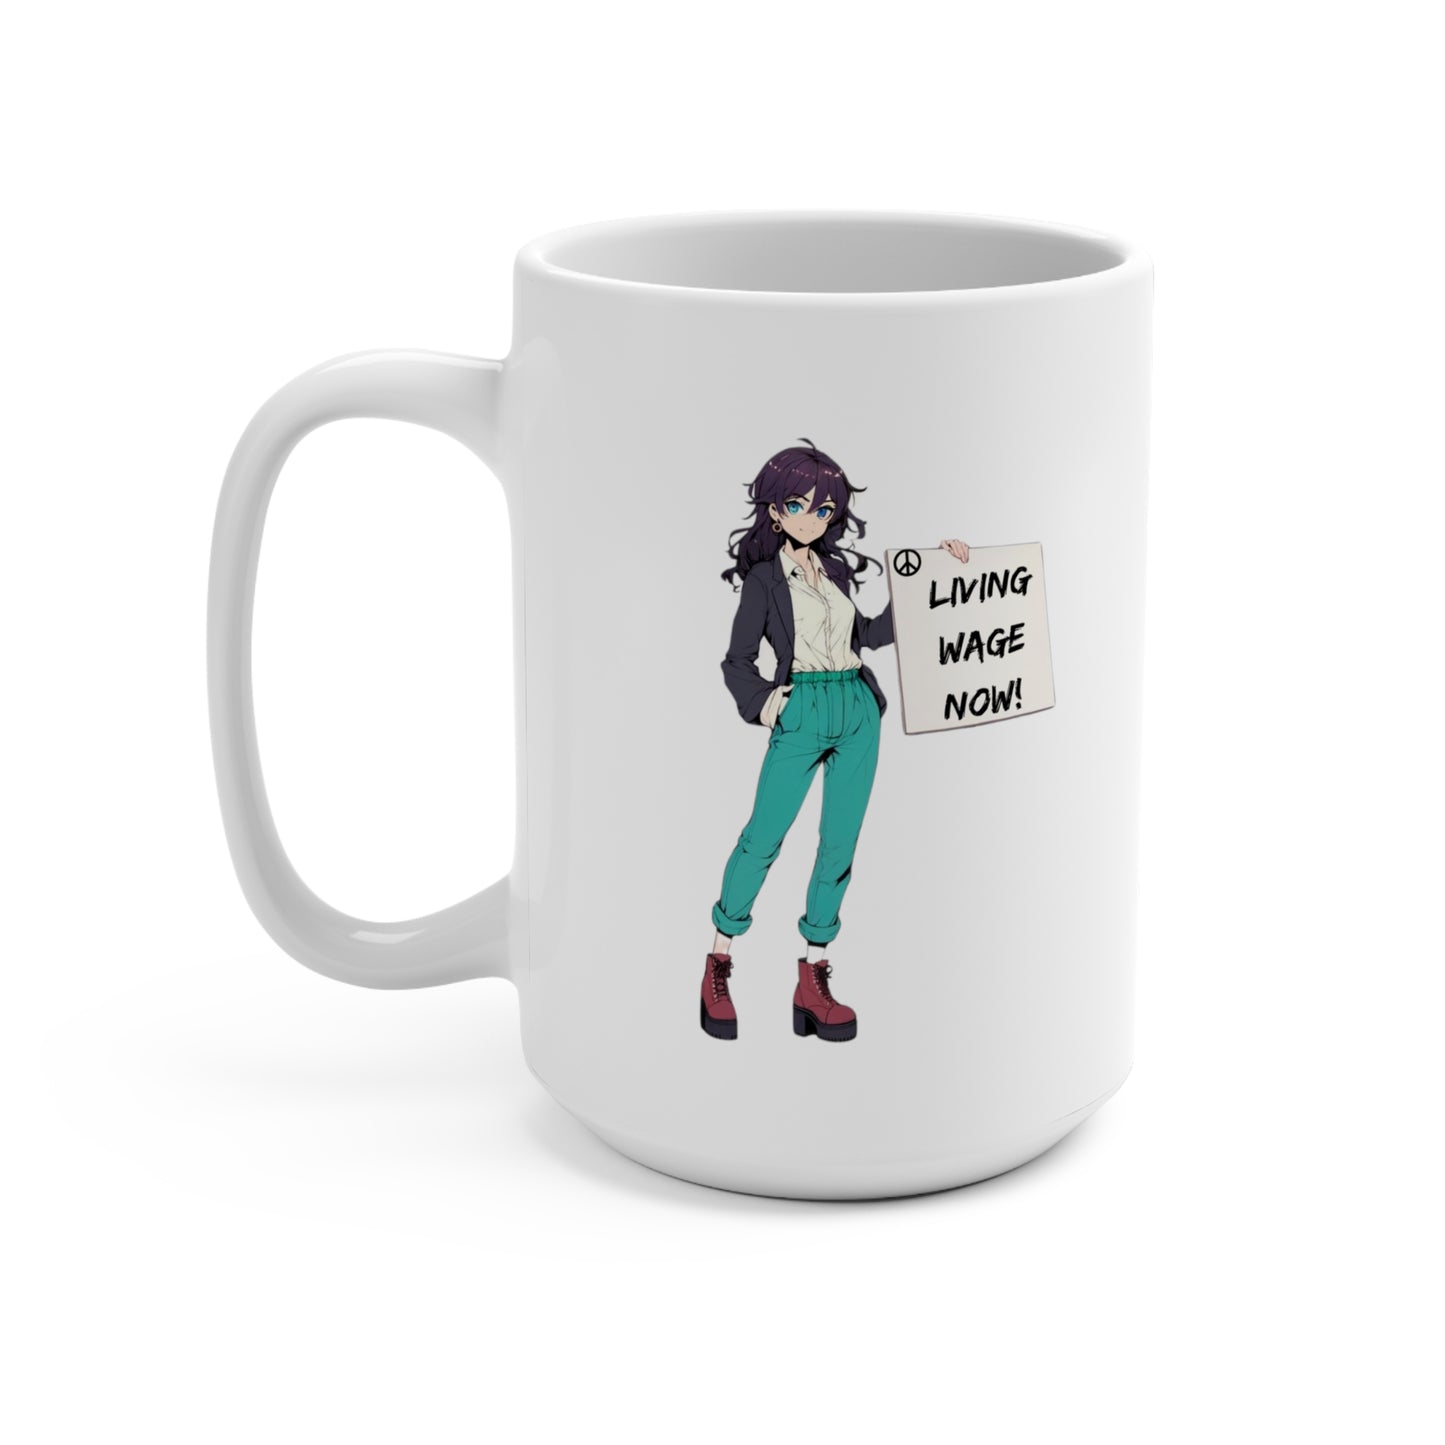 Living Wage Now! Inspirational Anime Statement Coffee Mug (15oz): Protest/Demand, Be an Activism! Say what you mean!